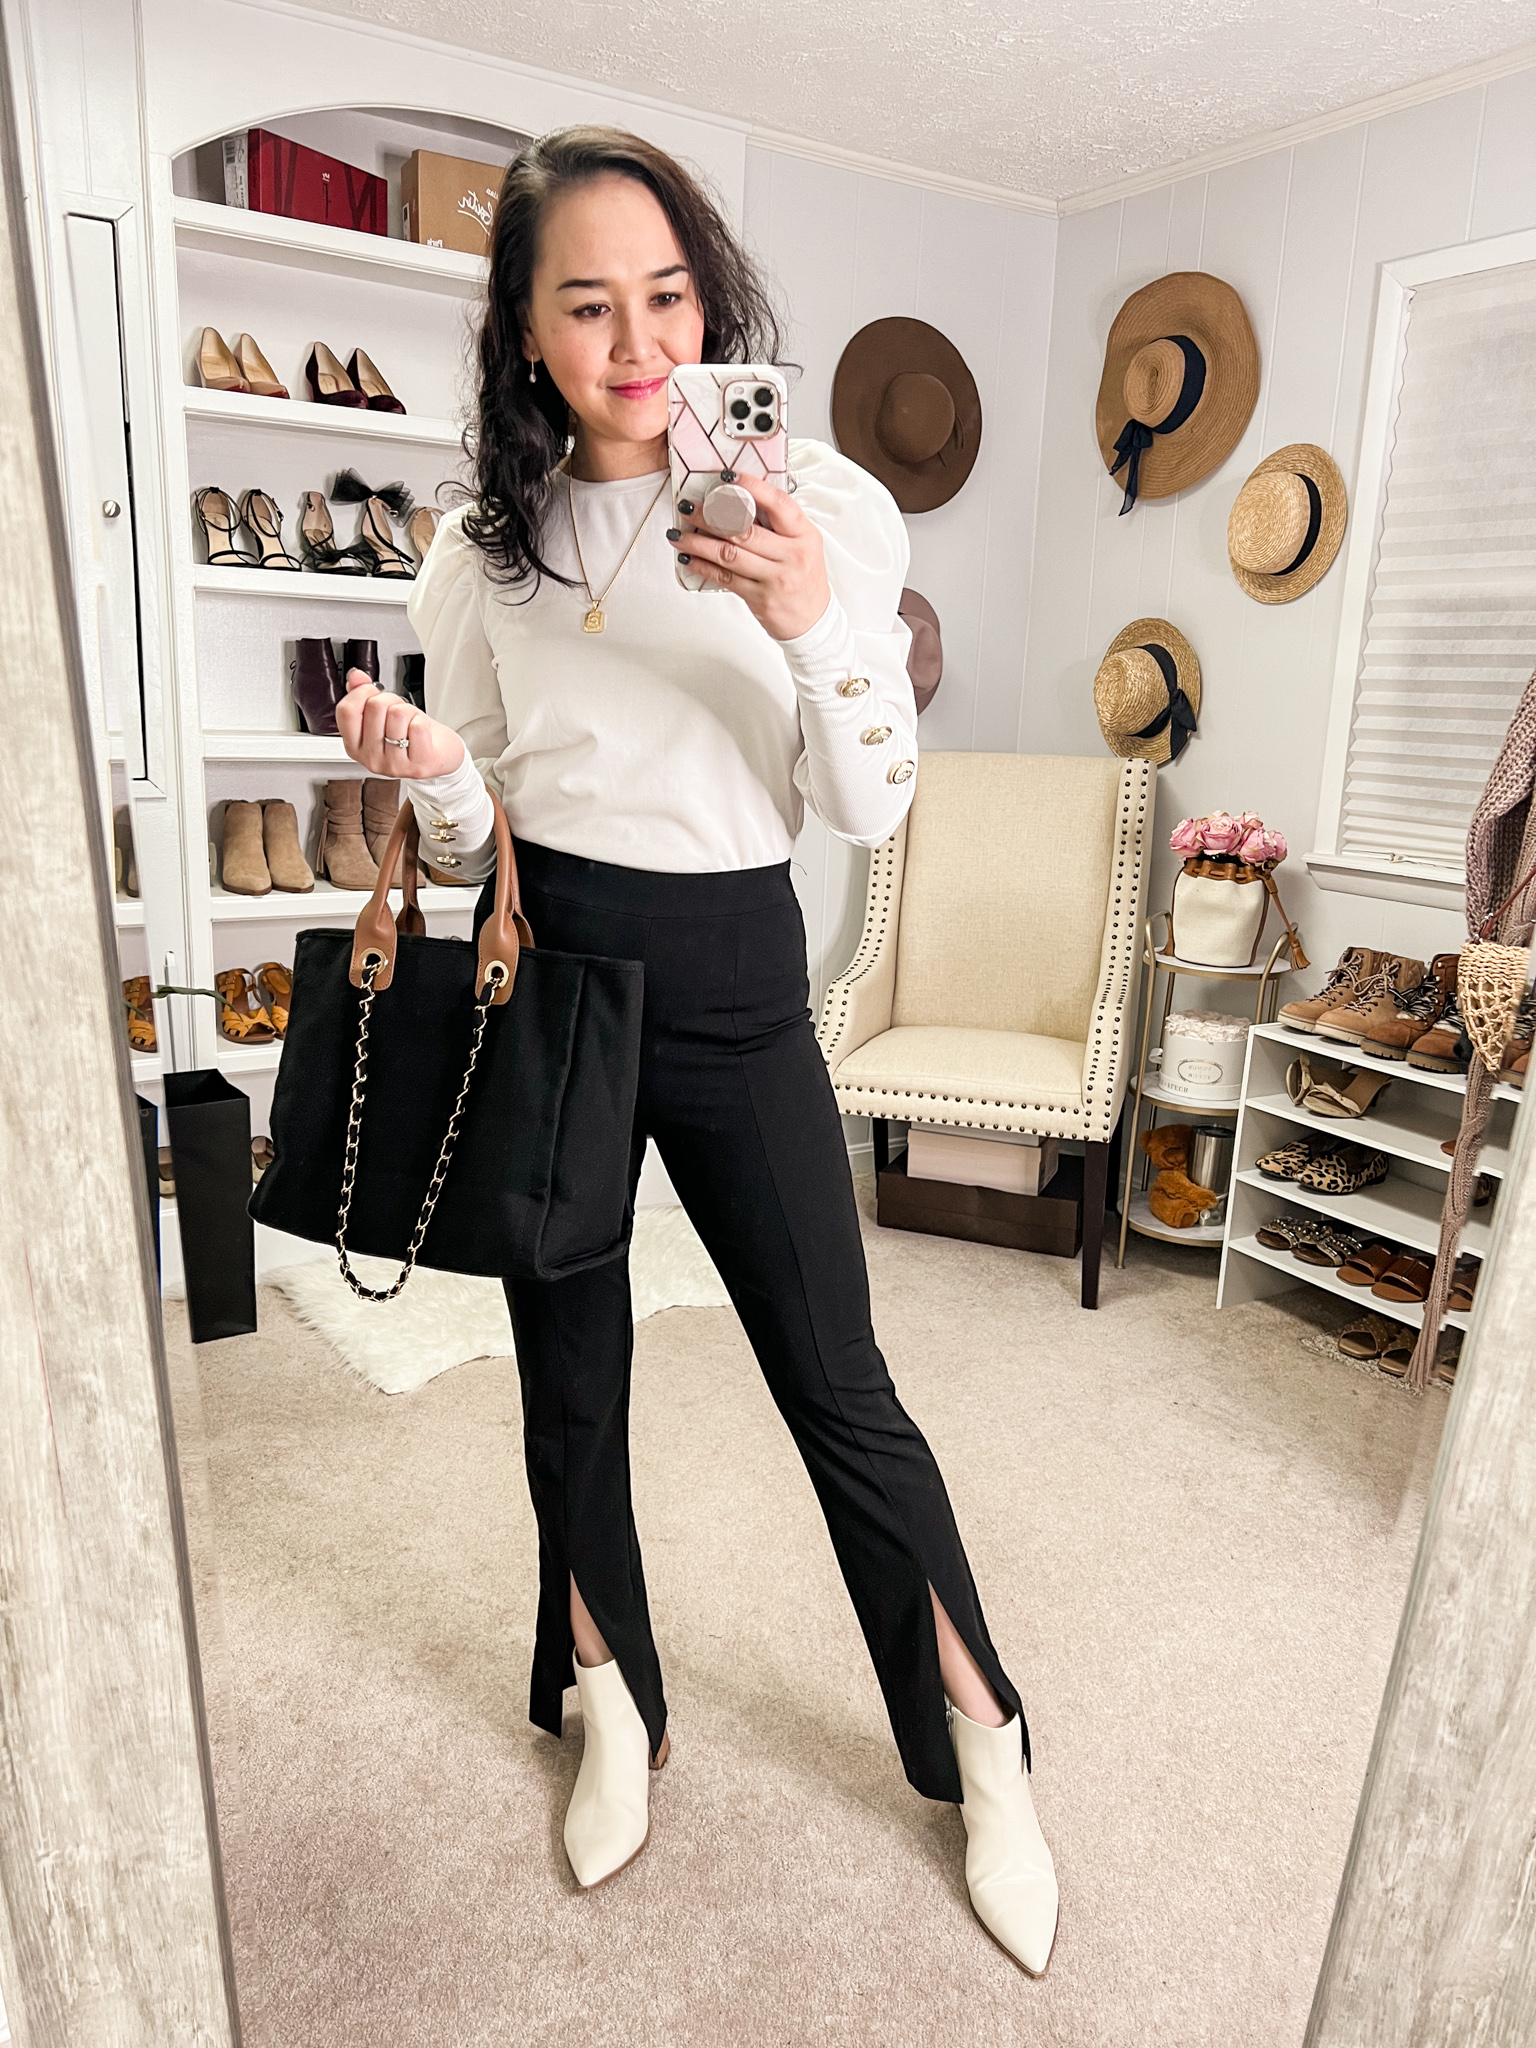 Cute for work or church  Black pants outfit, Black dress pants